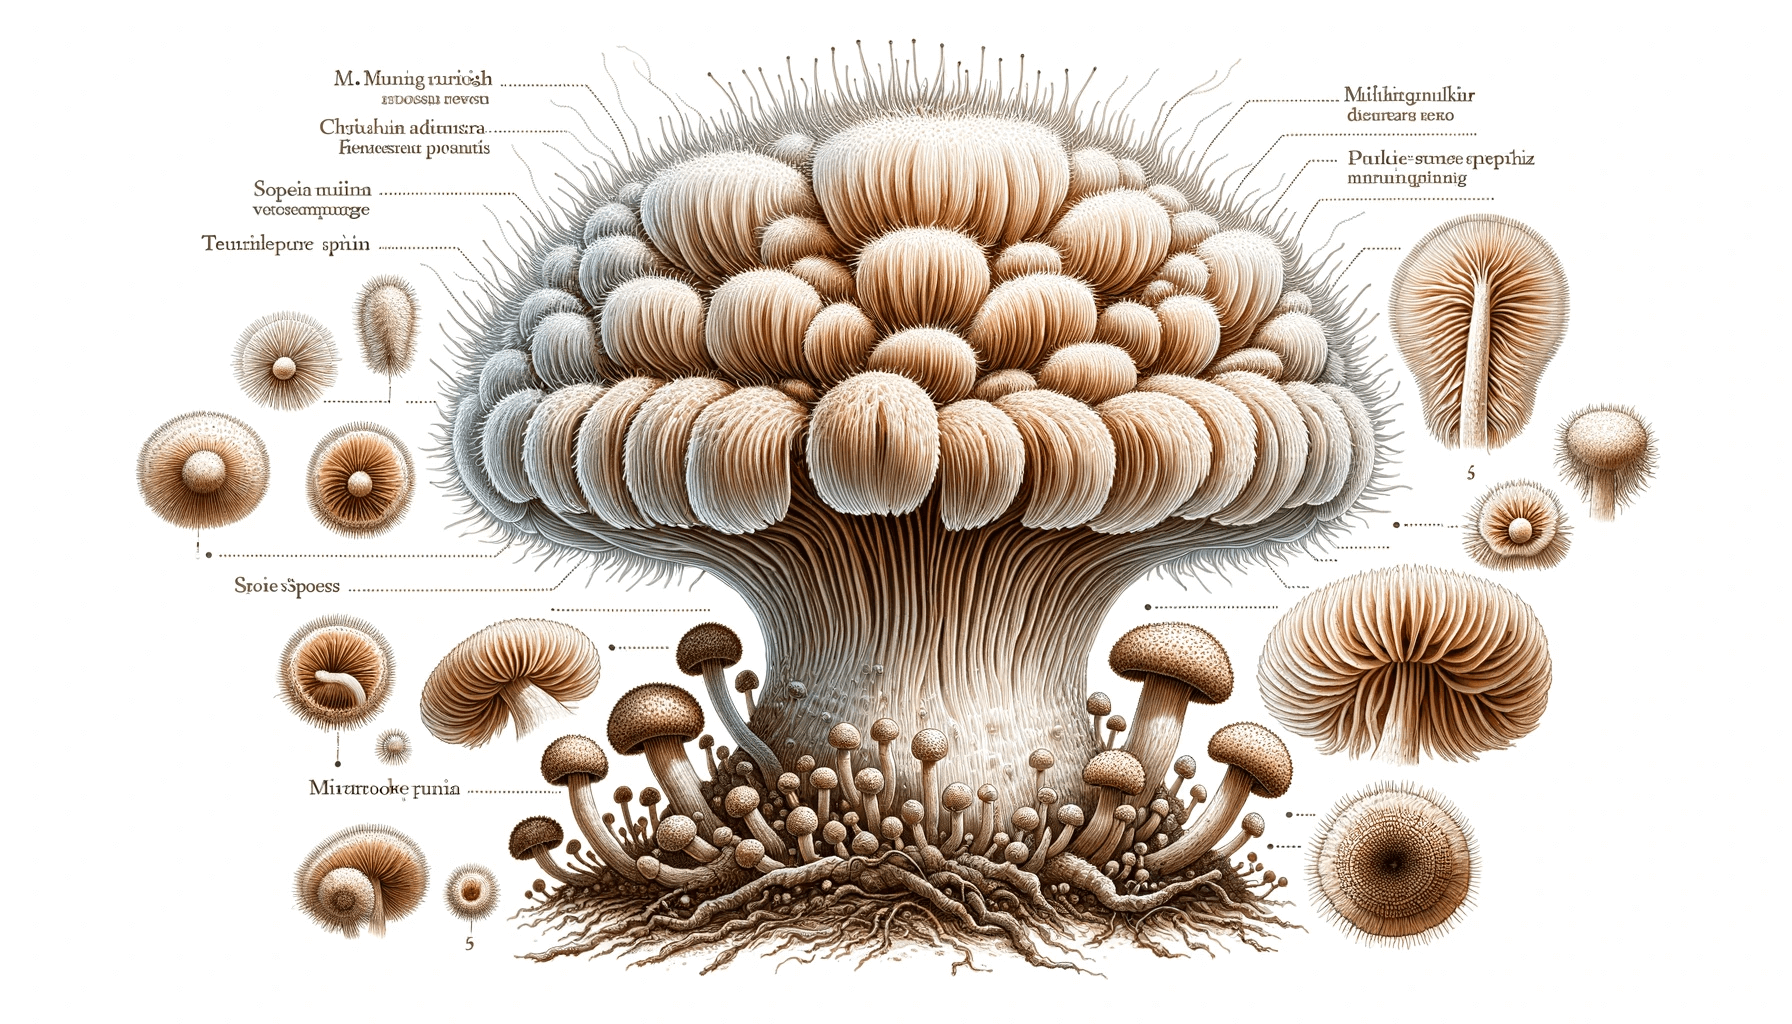 Detailed illustration of Lion's Mane mushroom anatomy, highlighting the distinctive teeth-like spines where spores are produced, perfect for educational insight on this unique fungus